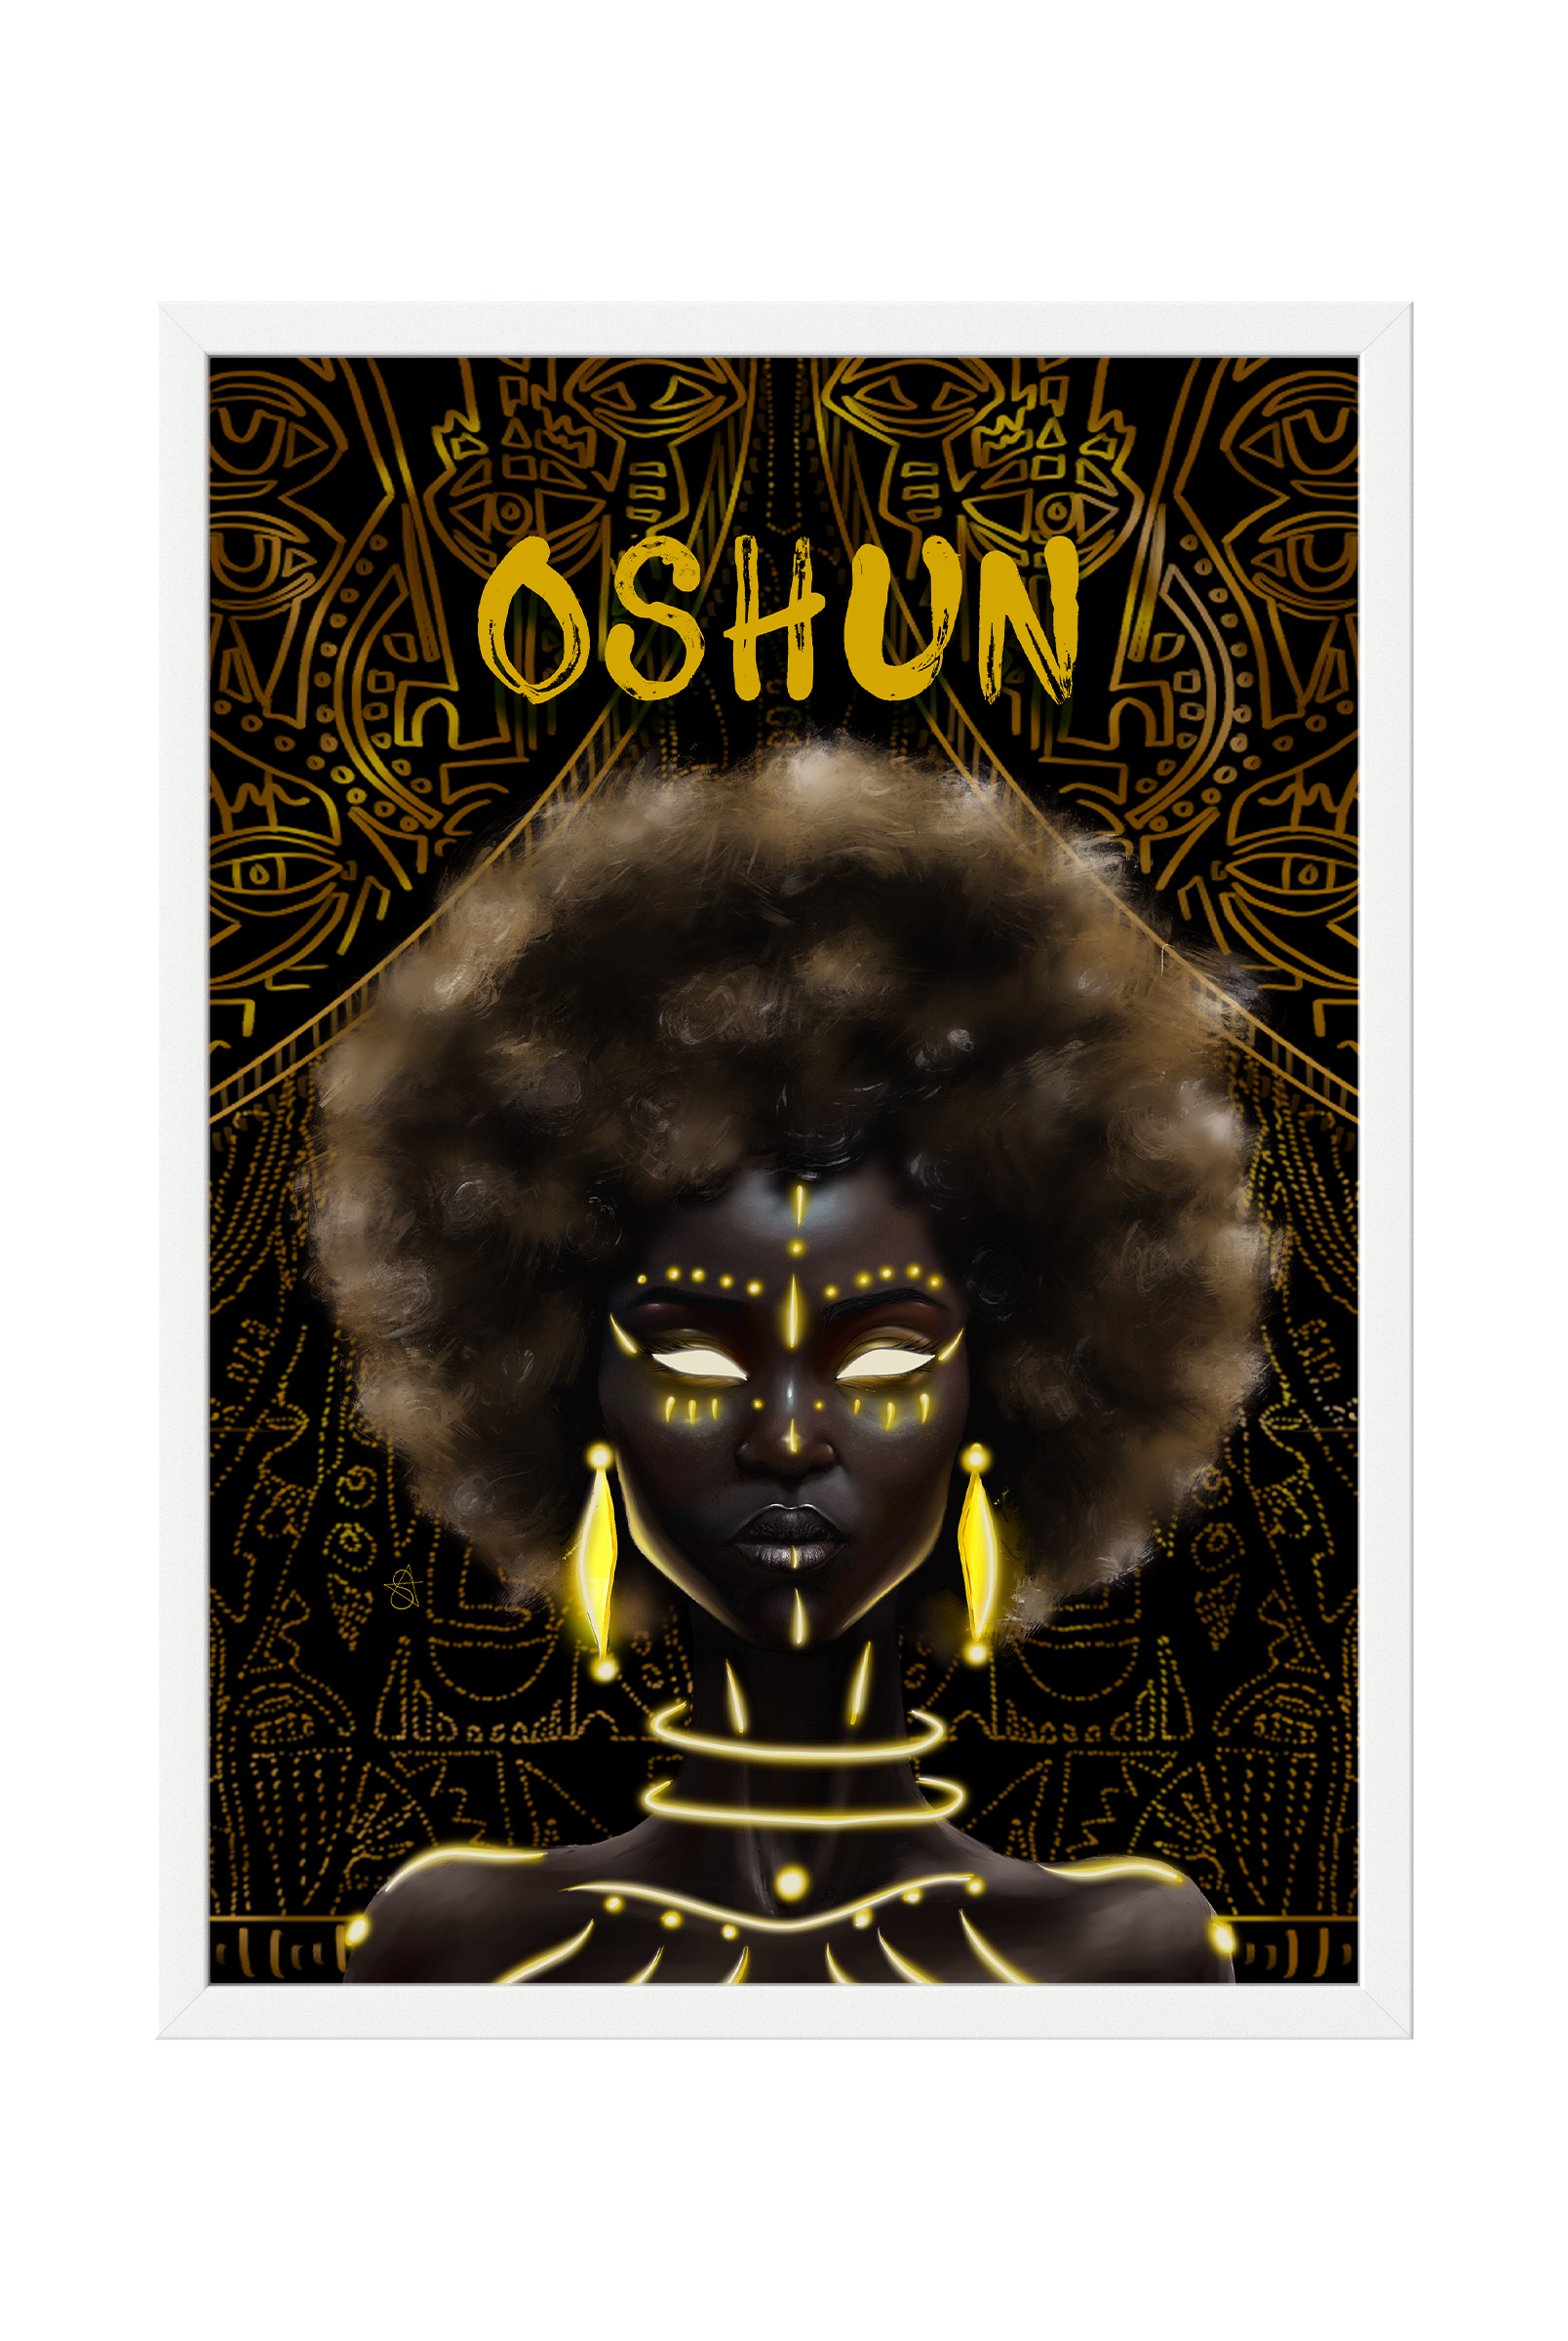 Oshun Holographic Art Print on high-quality matte or velvet paper, framed in gallery black, white, or natural maple, depicting Yoruba Orisa of sweet waters and femininity.